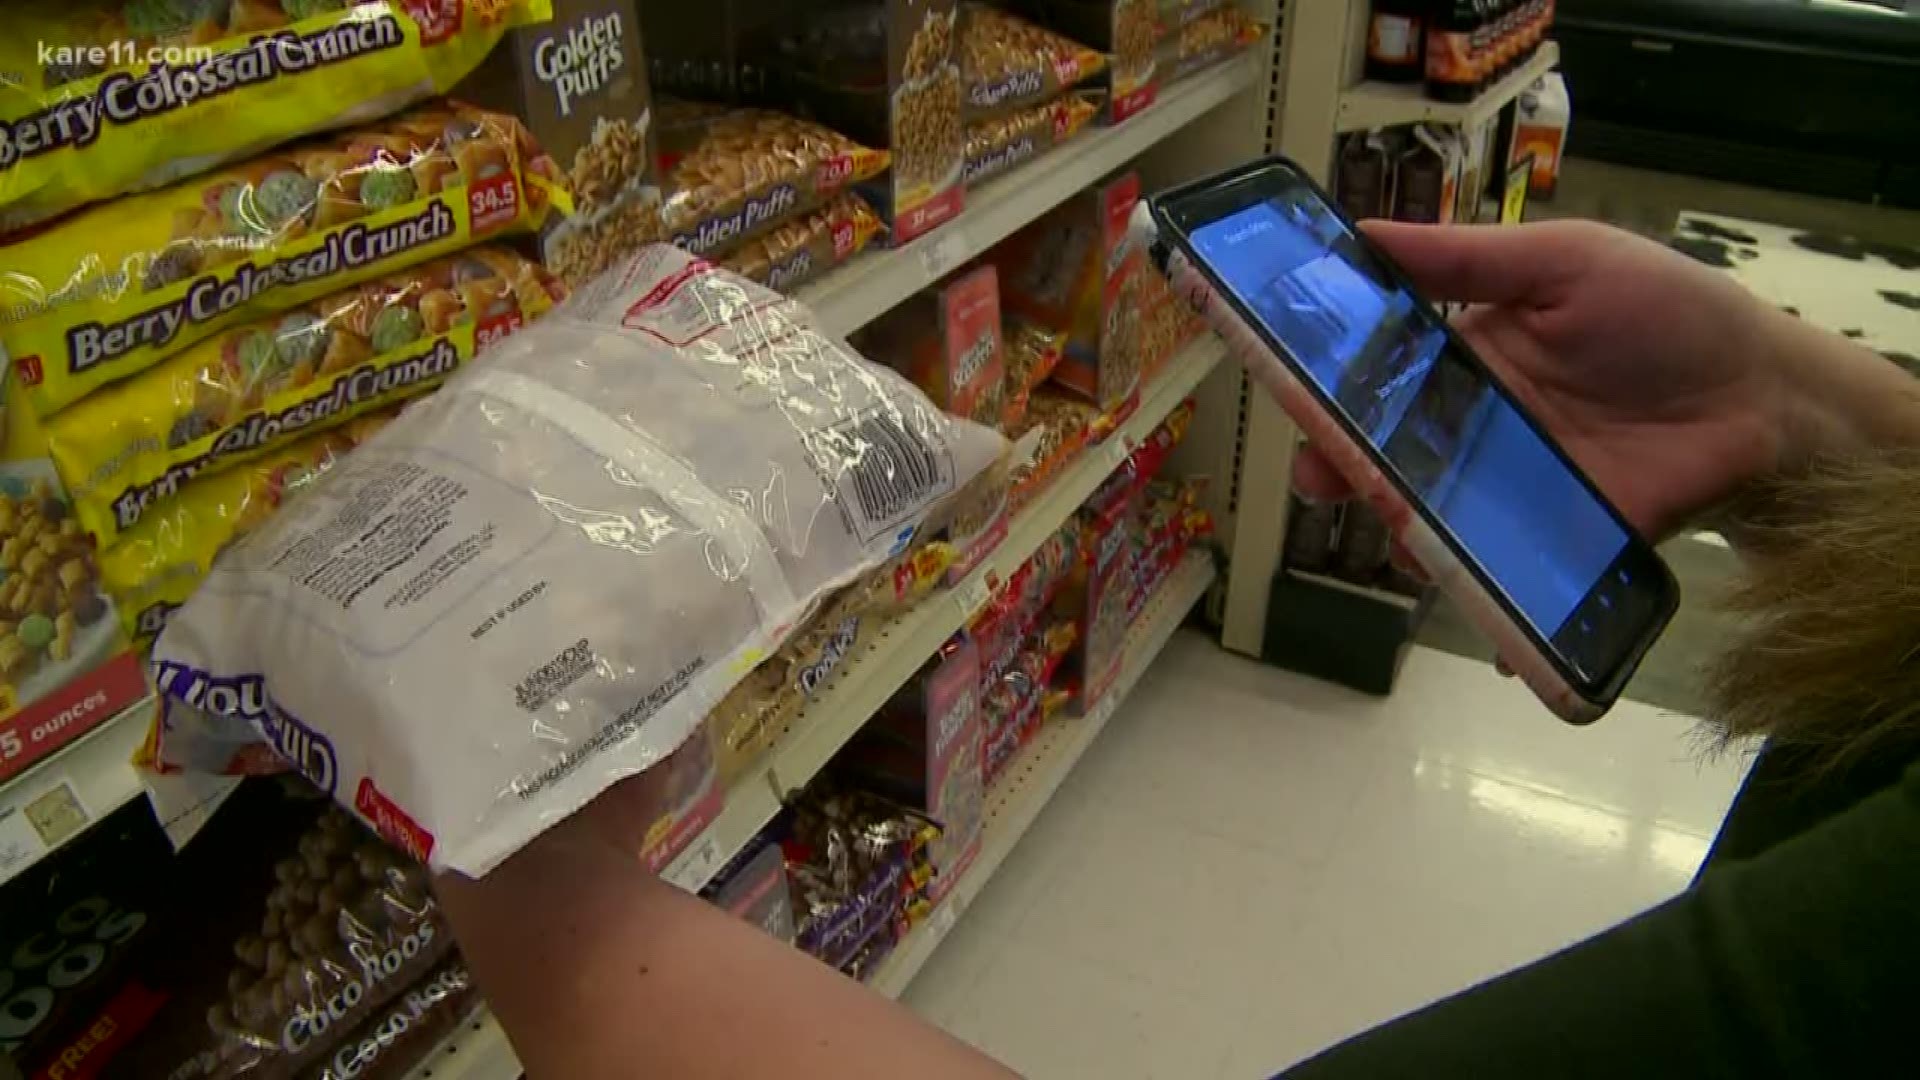 Nowadays there's an app for everything: Ordering food, finding your way around town, even clipping coupons. KARE 11's Gordon Severson talks to a woman who says she saved $500 this year on coupon apps. https://kare11.tv/2ycwePC